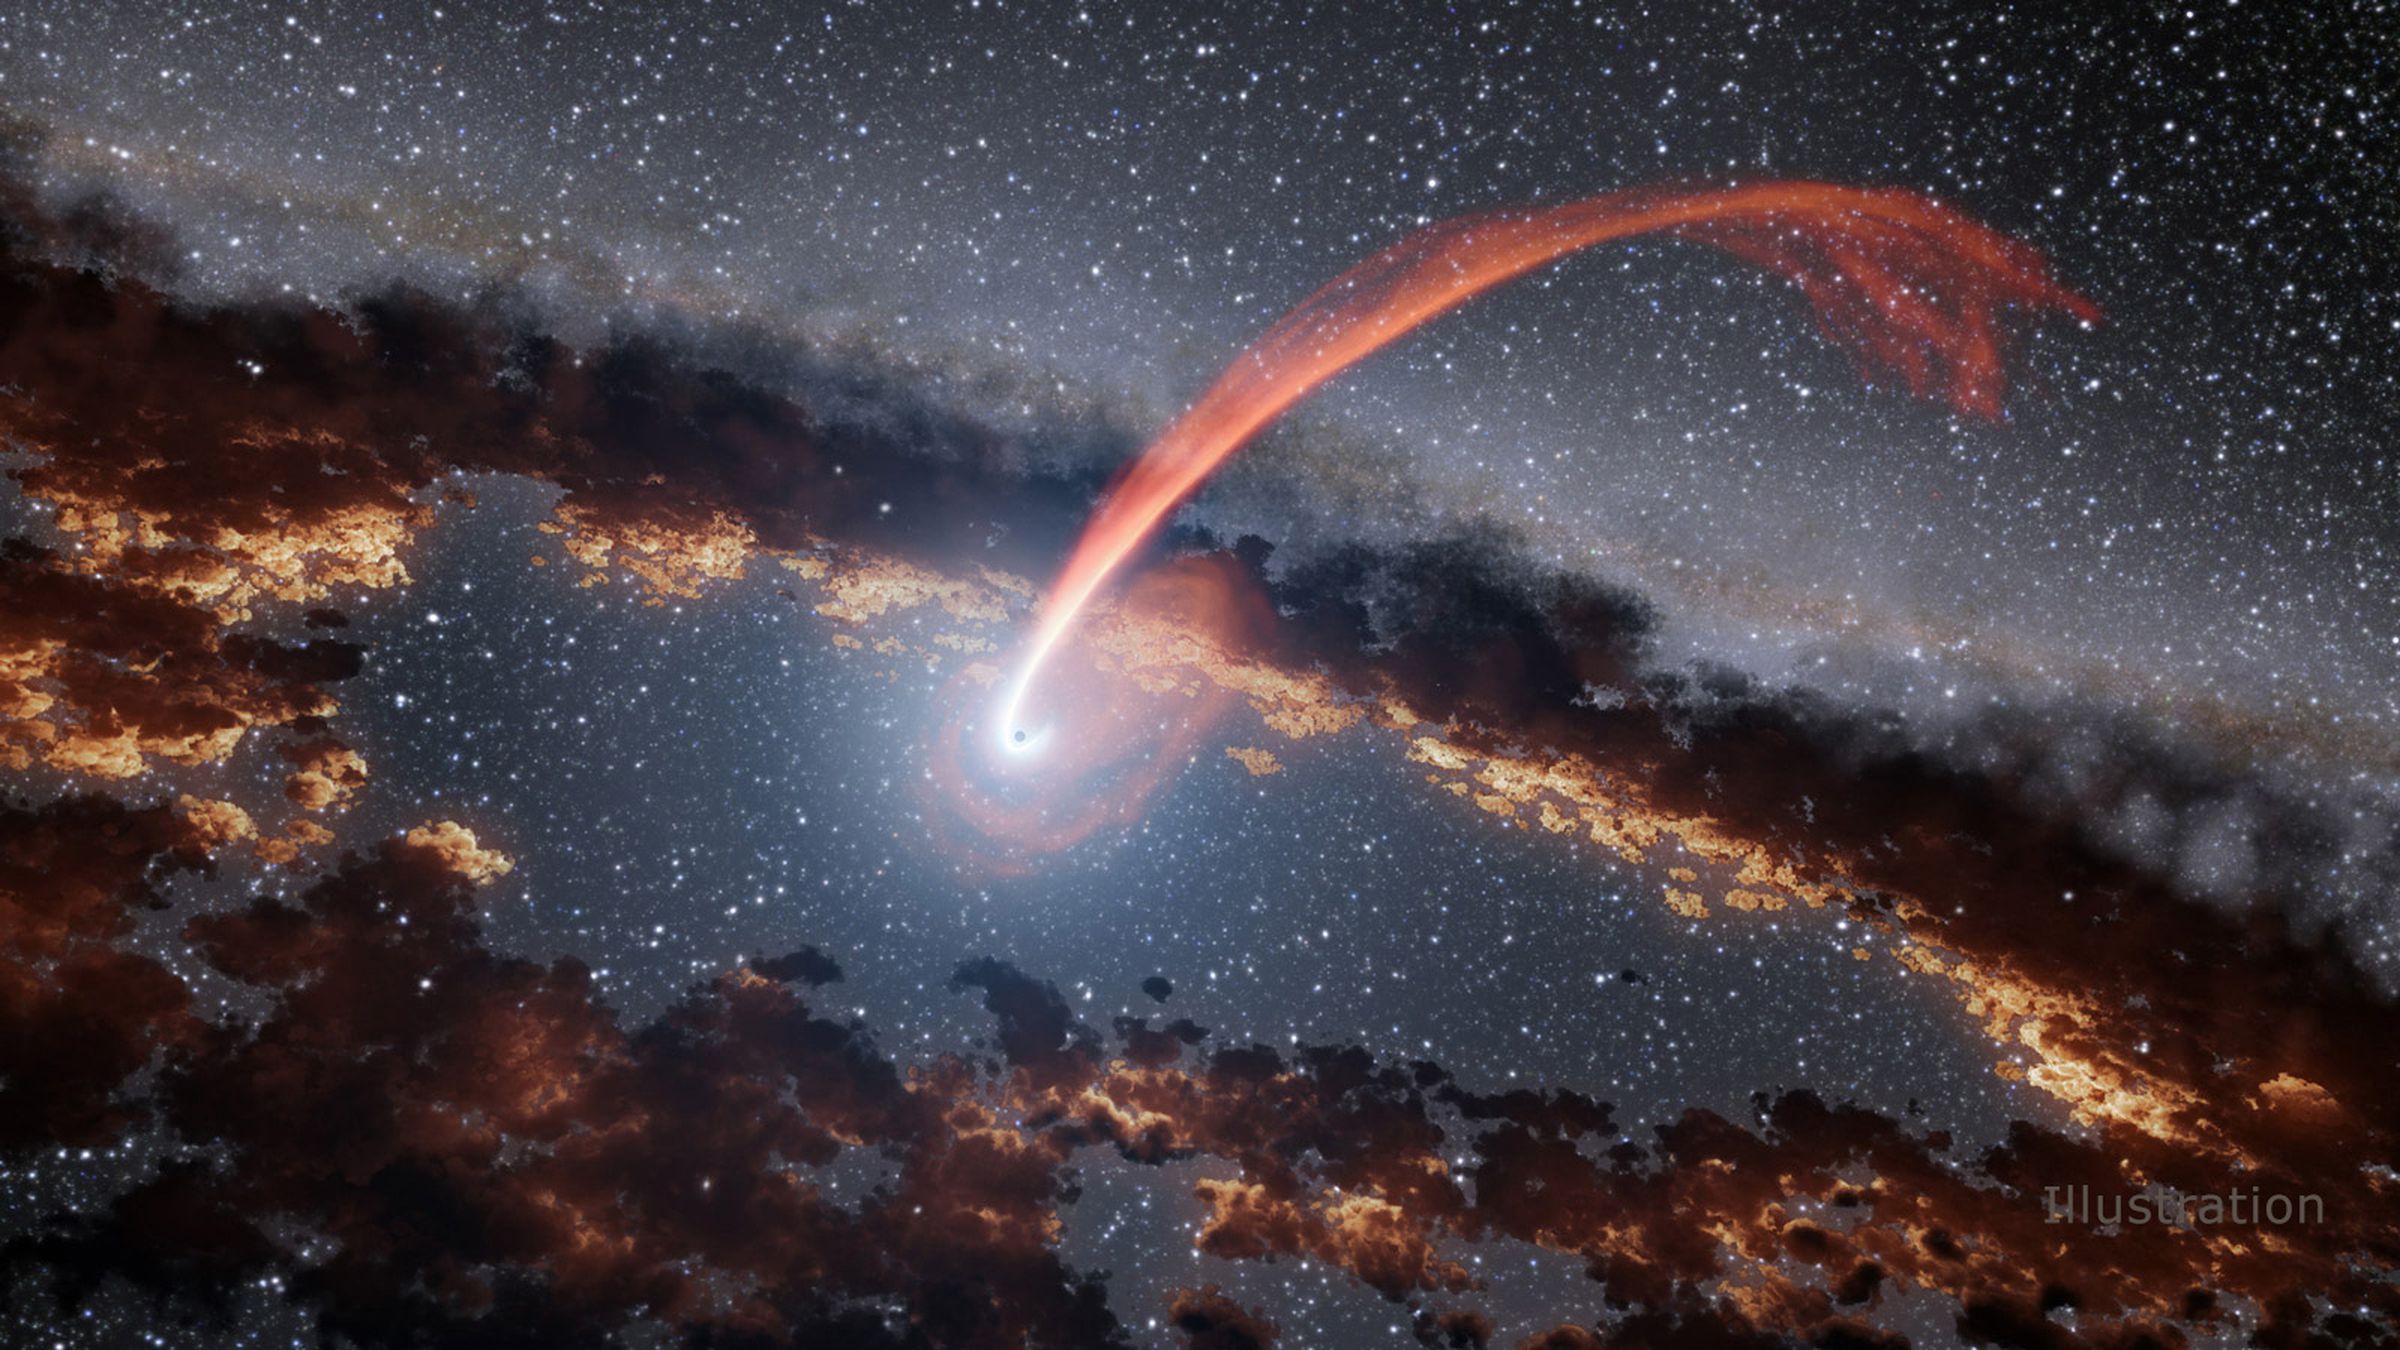 An artistic rendering of a star being pulled apart by a black hole.